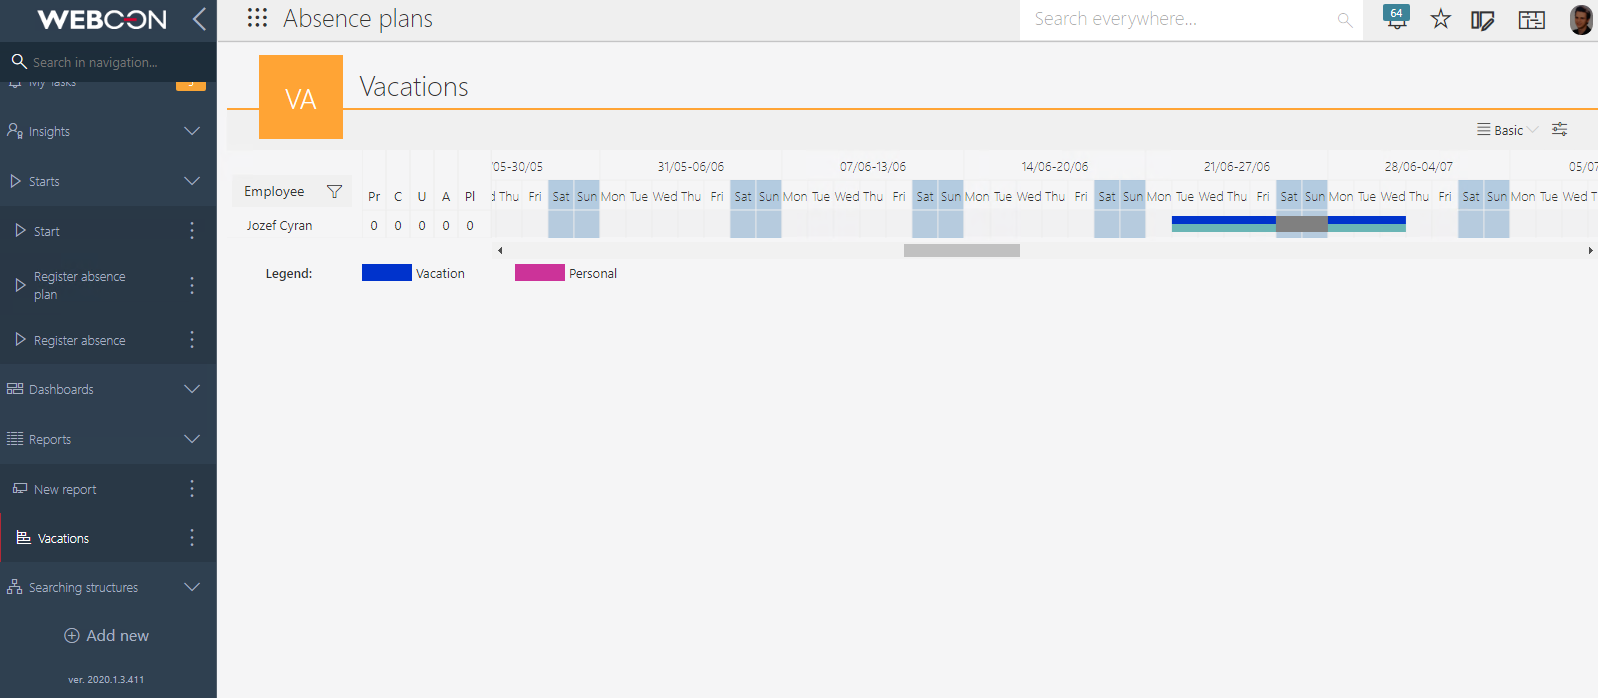 The image shows the Gantt chart